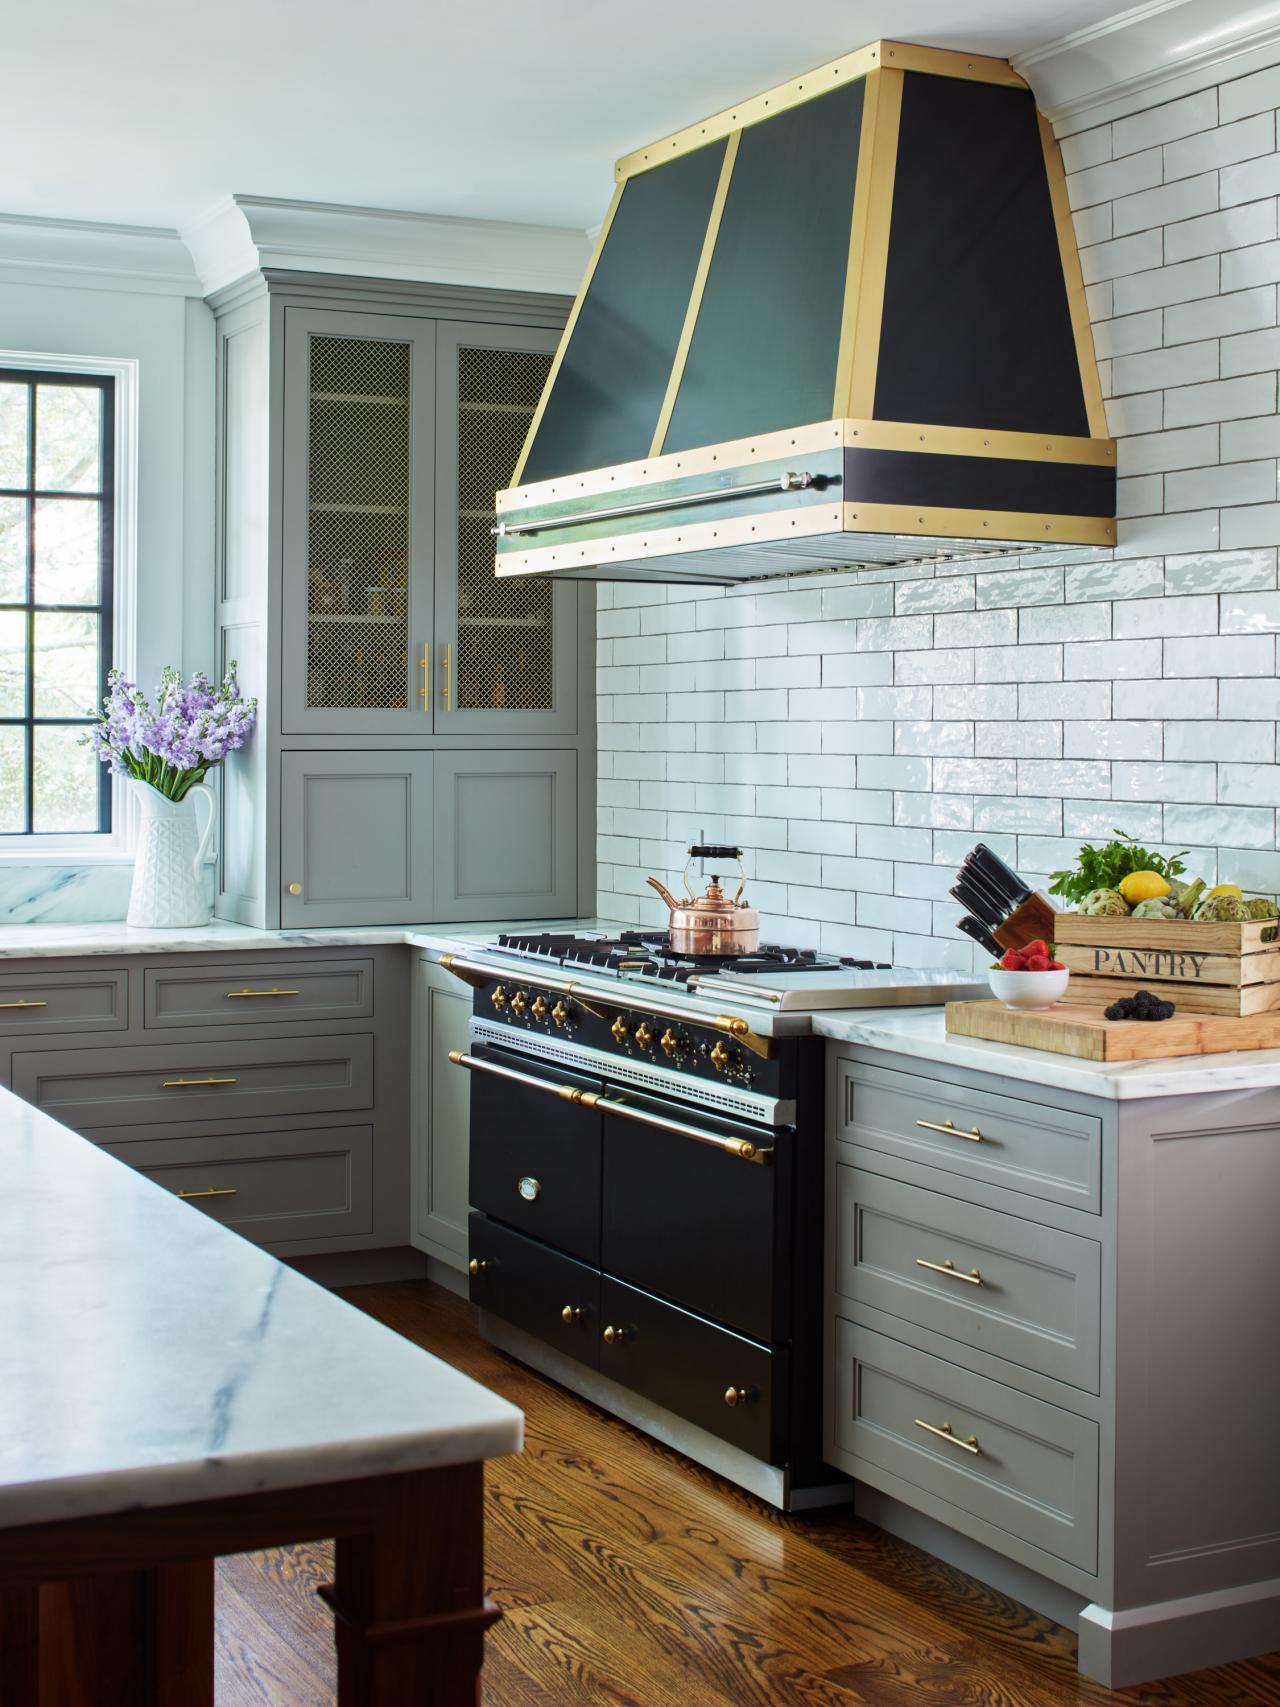 Subway Tile Backsplashes Pictures, Are Glass Subway Tiles Out Of Style